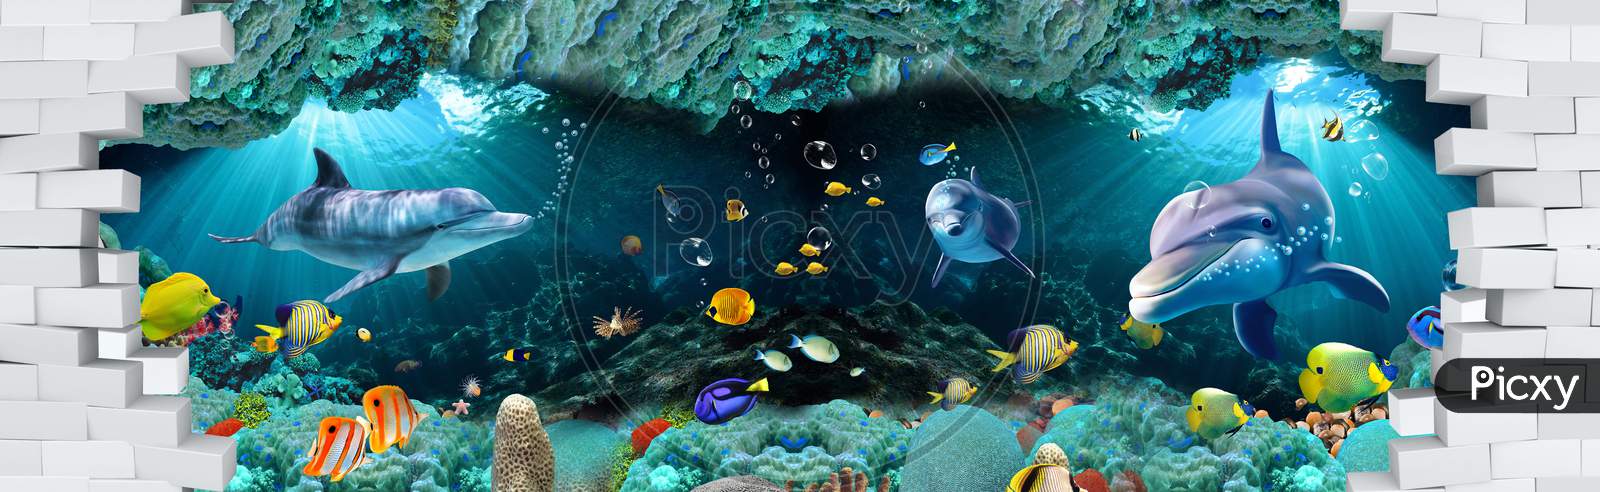 3D Underwater Fishes Living Room Wallpaper, 3D Illustration For Wall Decoration High Quality Wall Art.